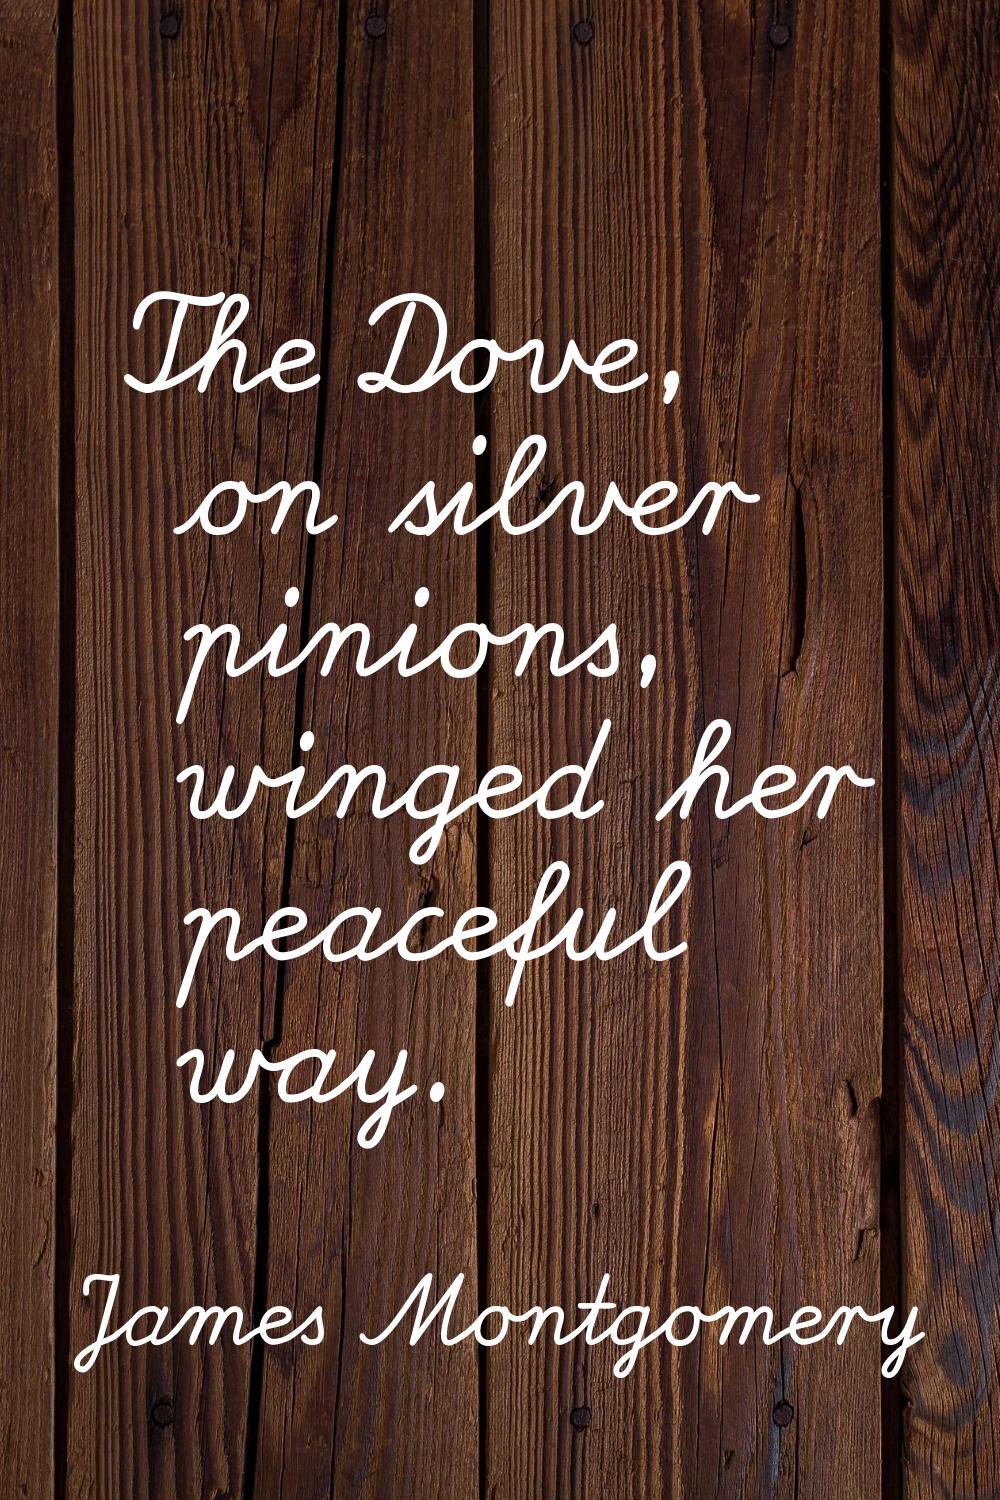 The Dove, on silver pinions, winged her peaceful way.